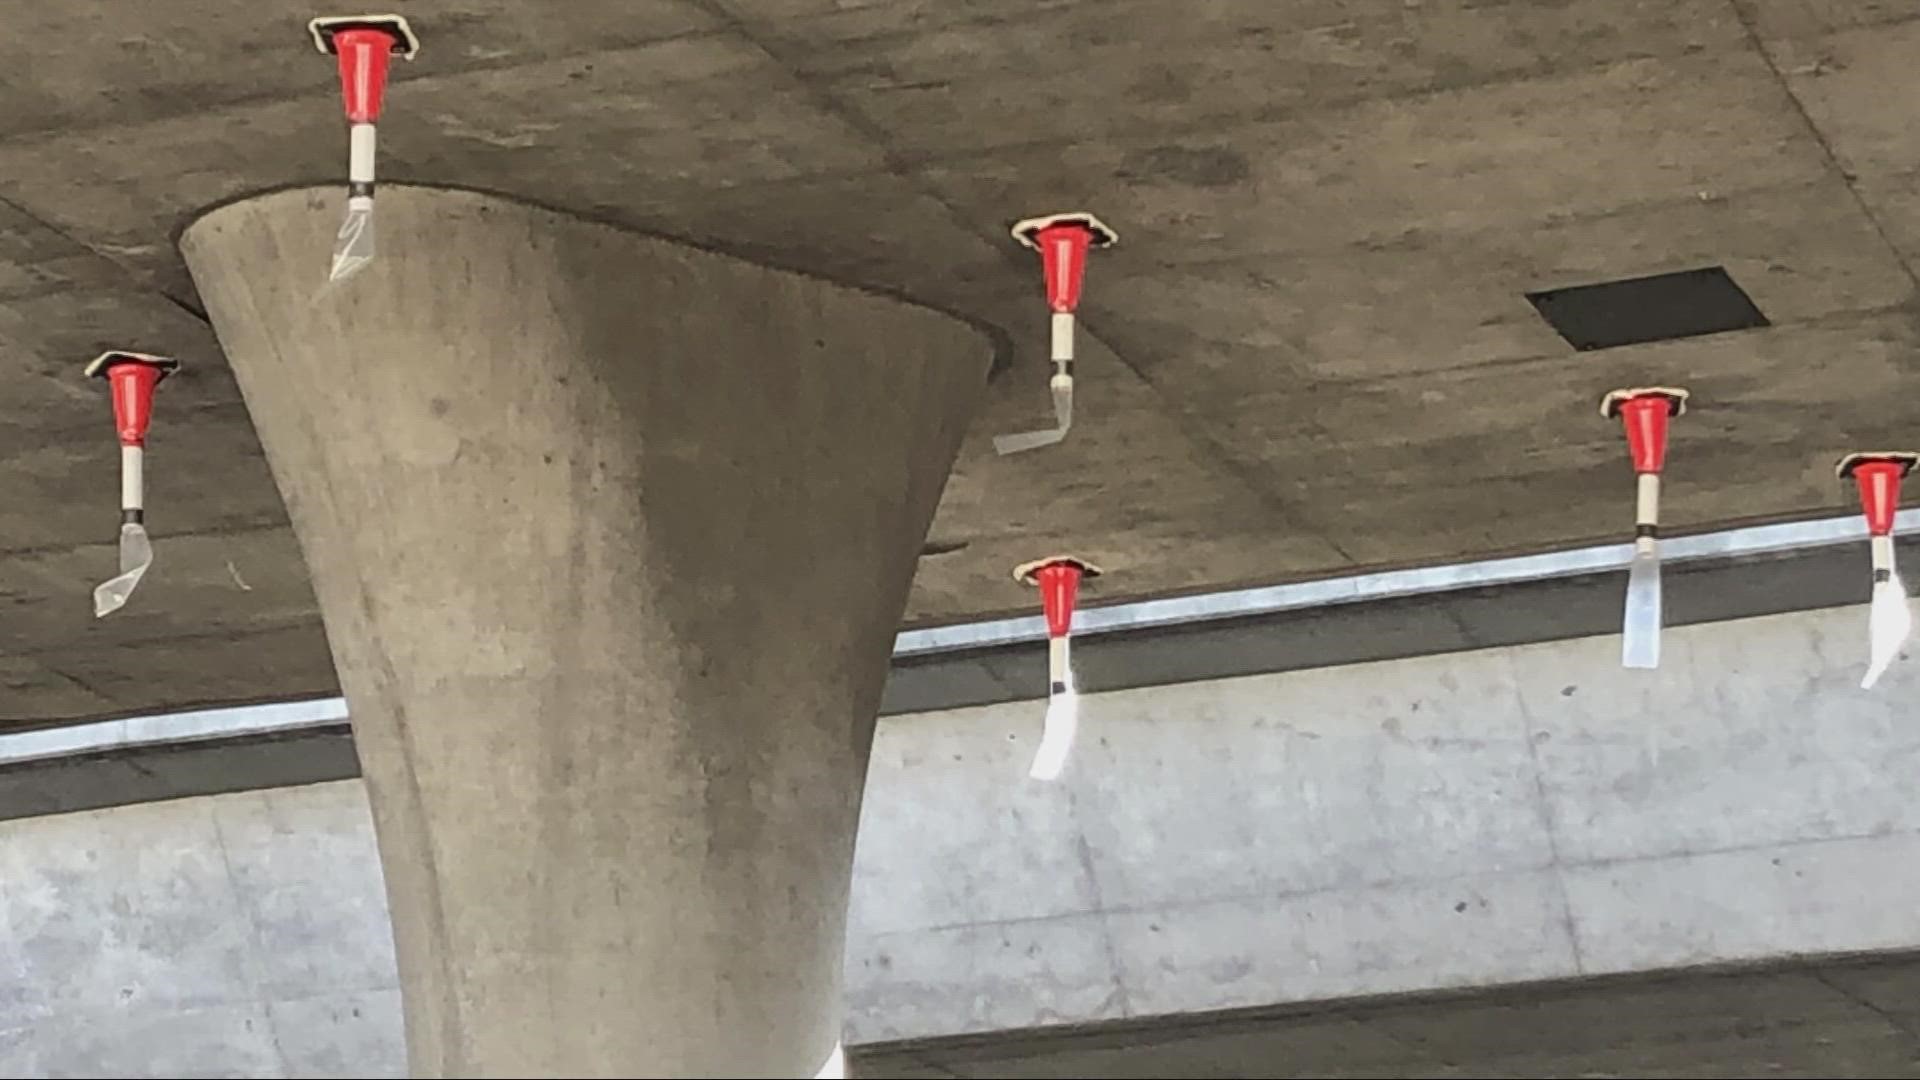 The cones, also known as exclusion devices, are intended to keep birds and bats safe during construction projects.